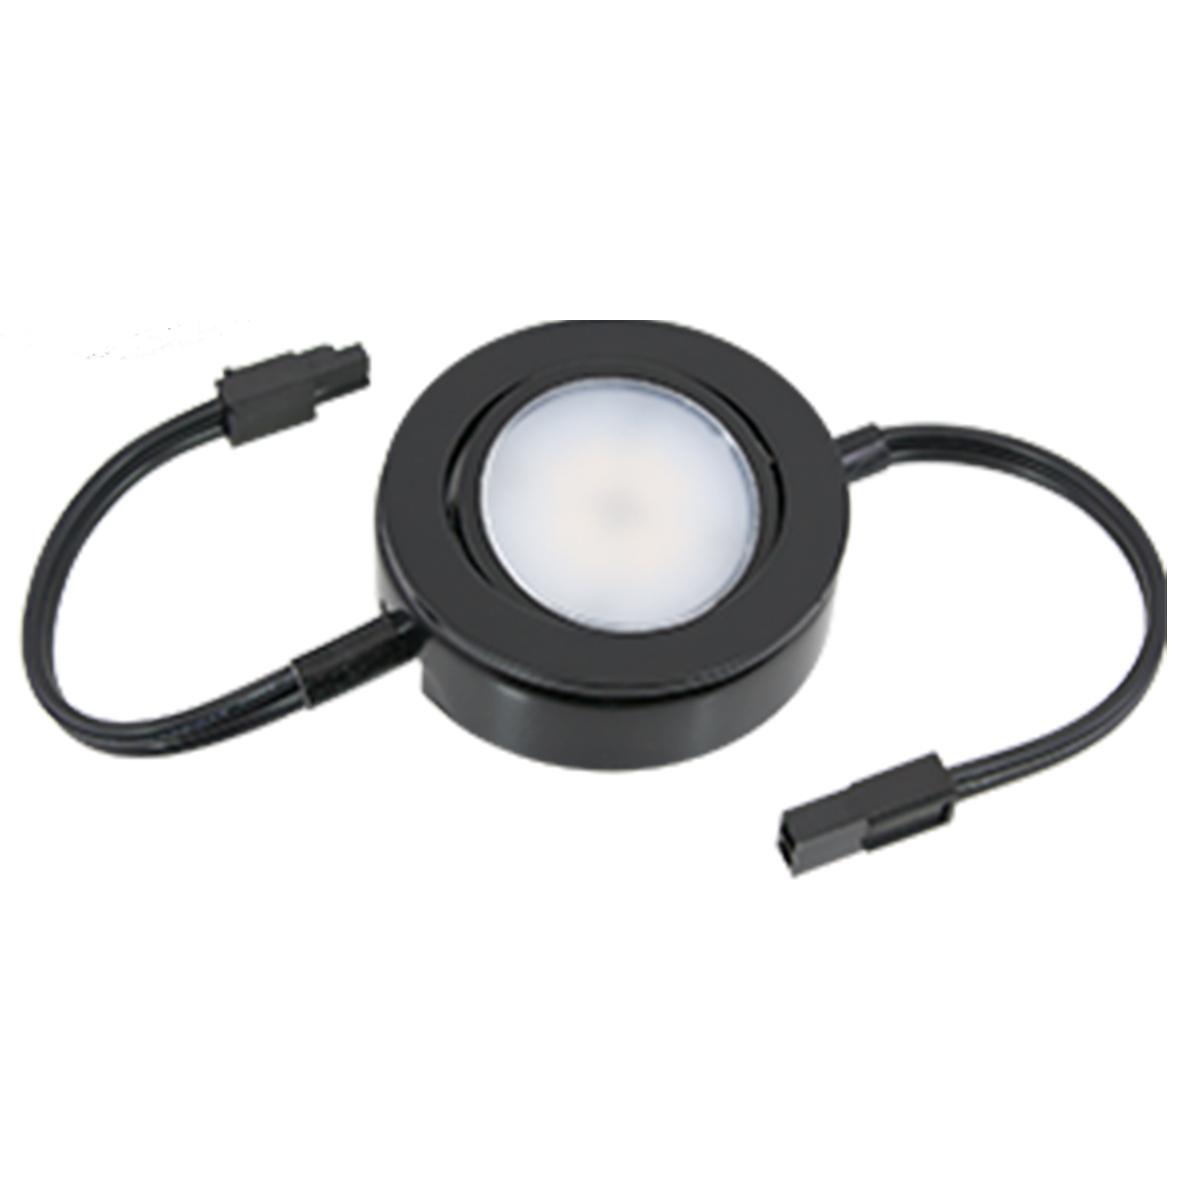 MVP LED Puck Light with Lead and Tail wires, 4.3 Watts, 2700K, 120V, Black - Bees Lighting